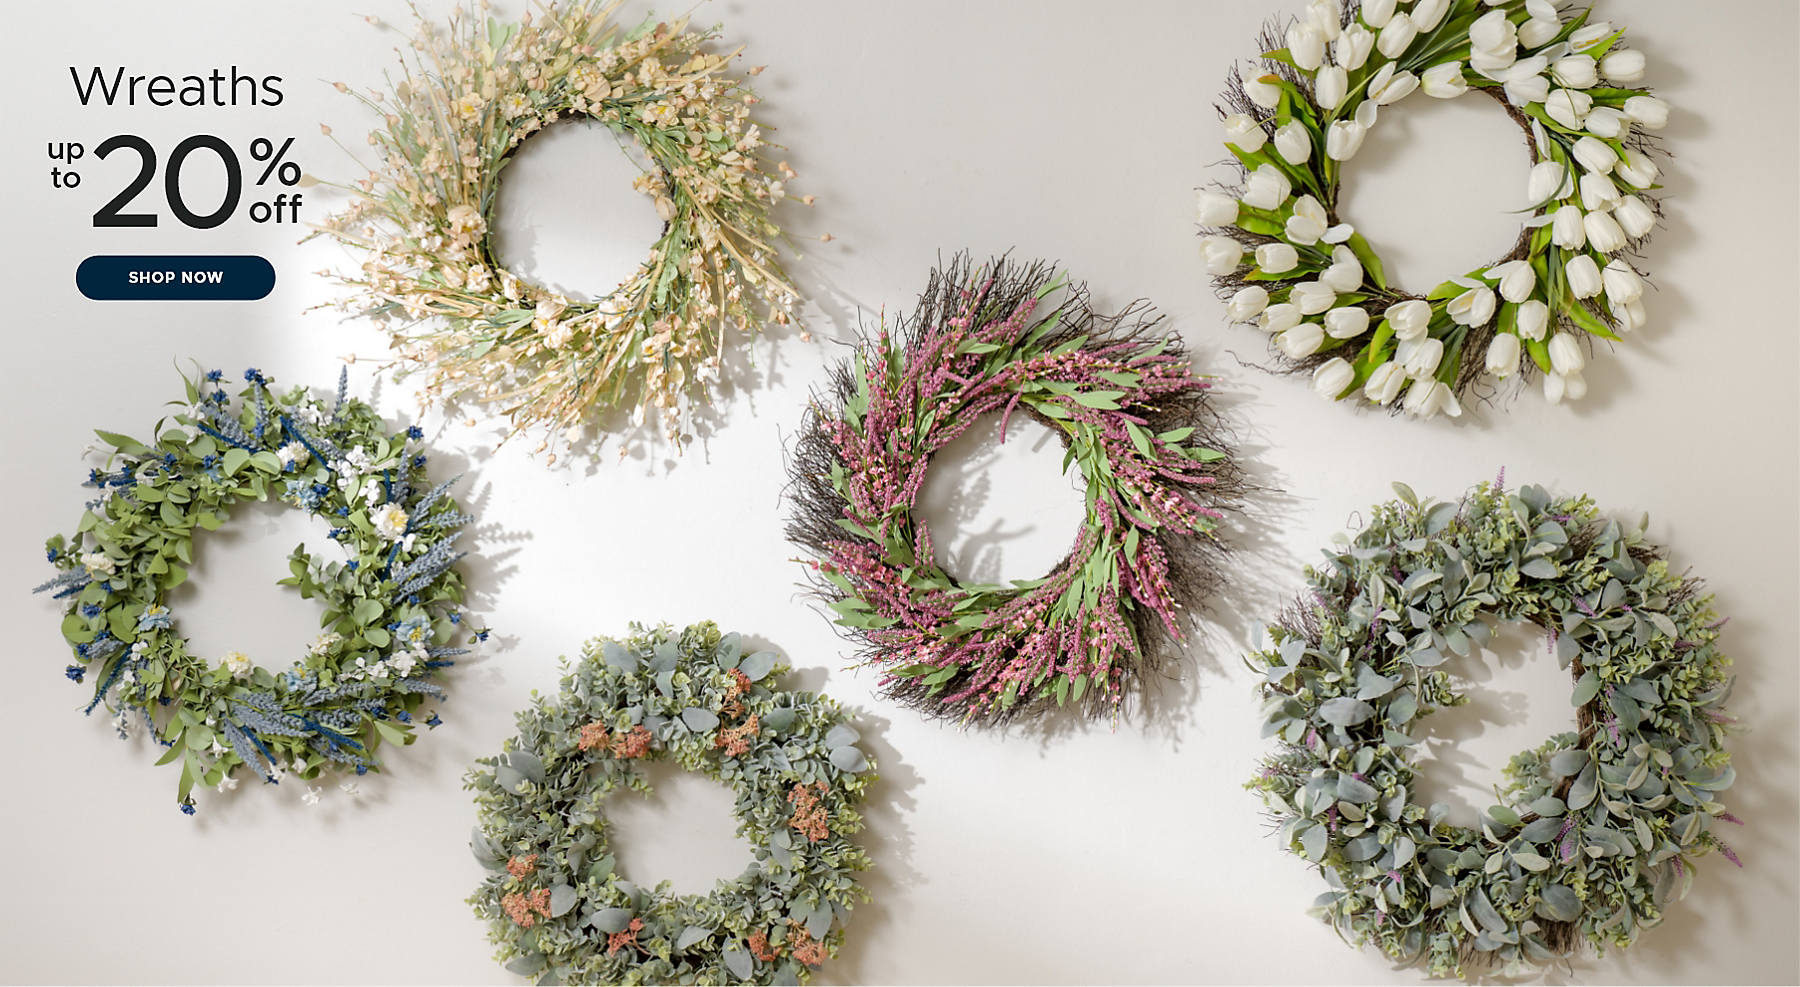 Wreaths up to 20% off shop now